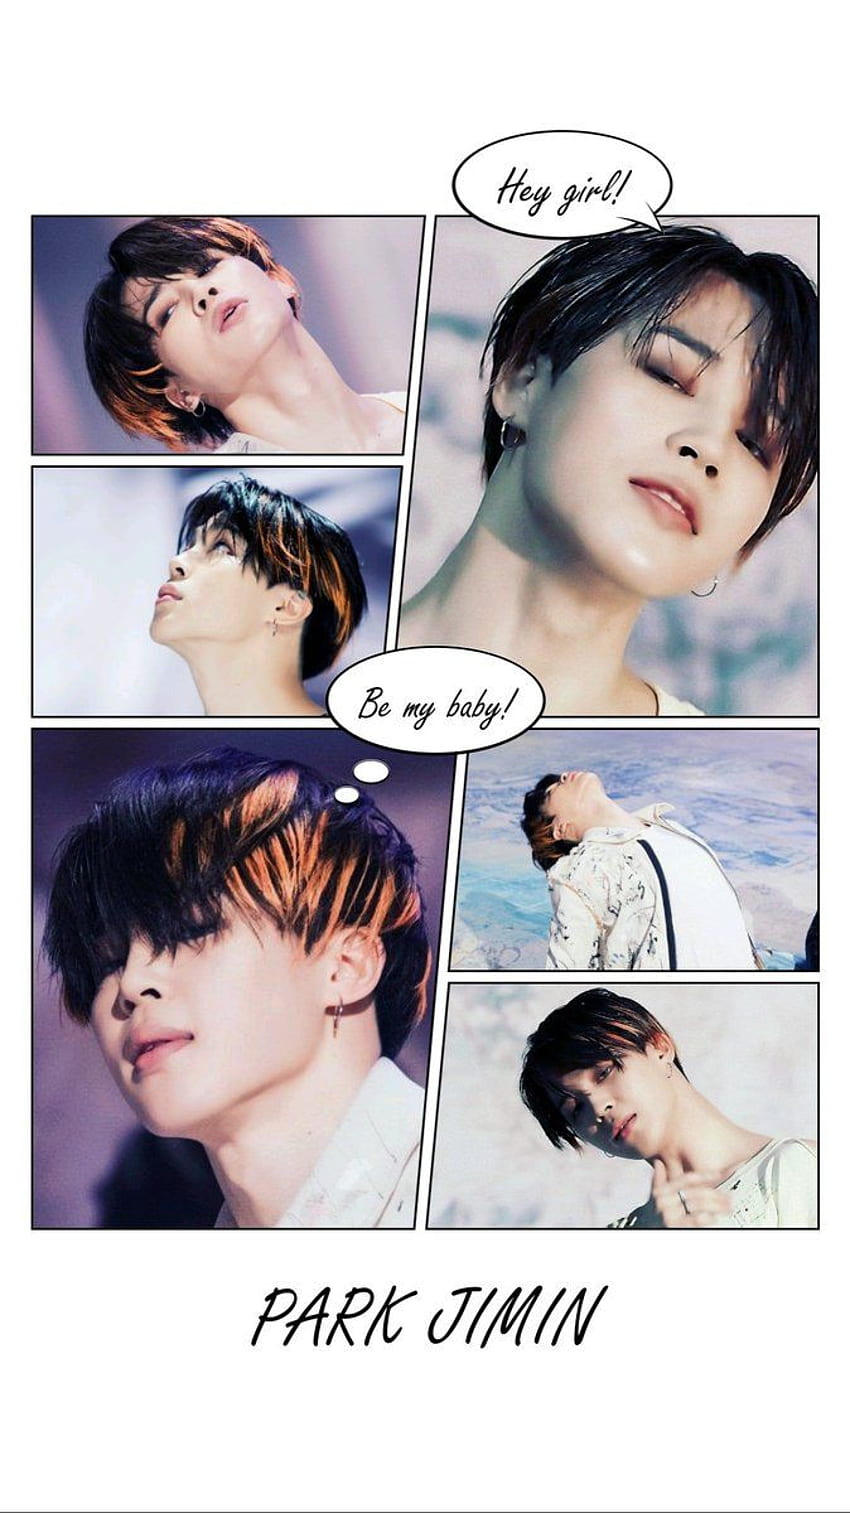 BTS Phone - [REQUEST] created by me. Make sure to : give credit if you share, RT and LIKE if you save, follow me to support, DM me for, BTS Jimin HD phone wallpaper